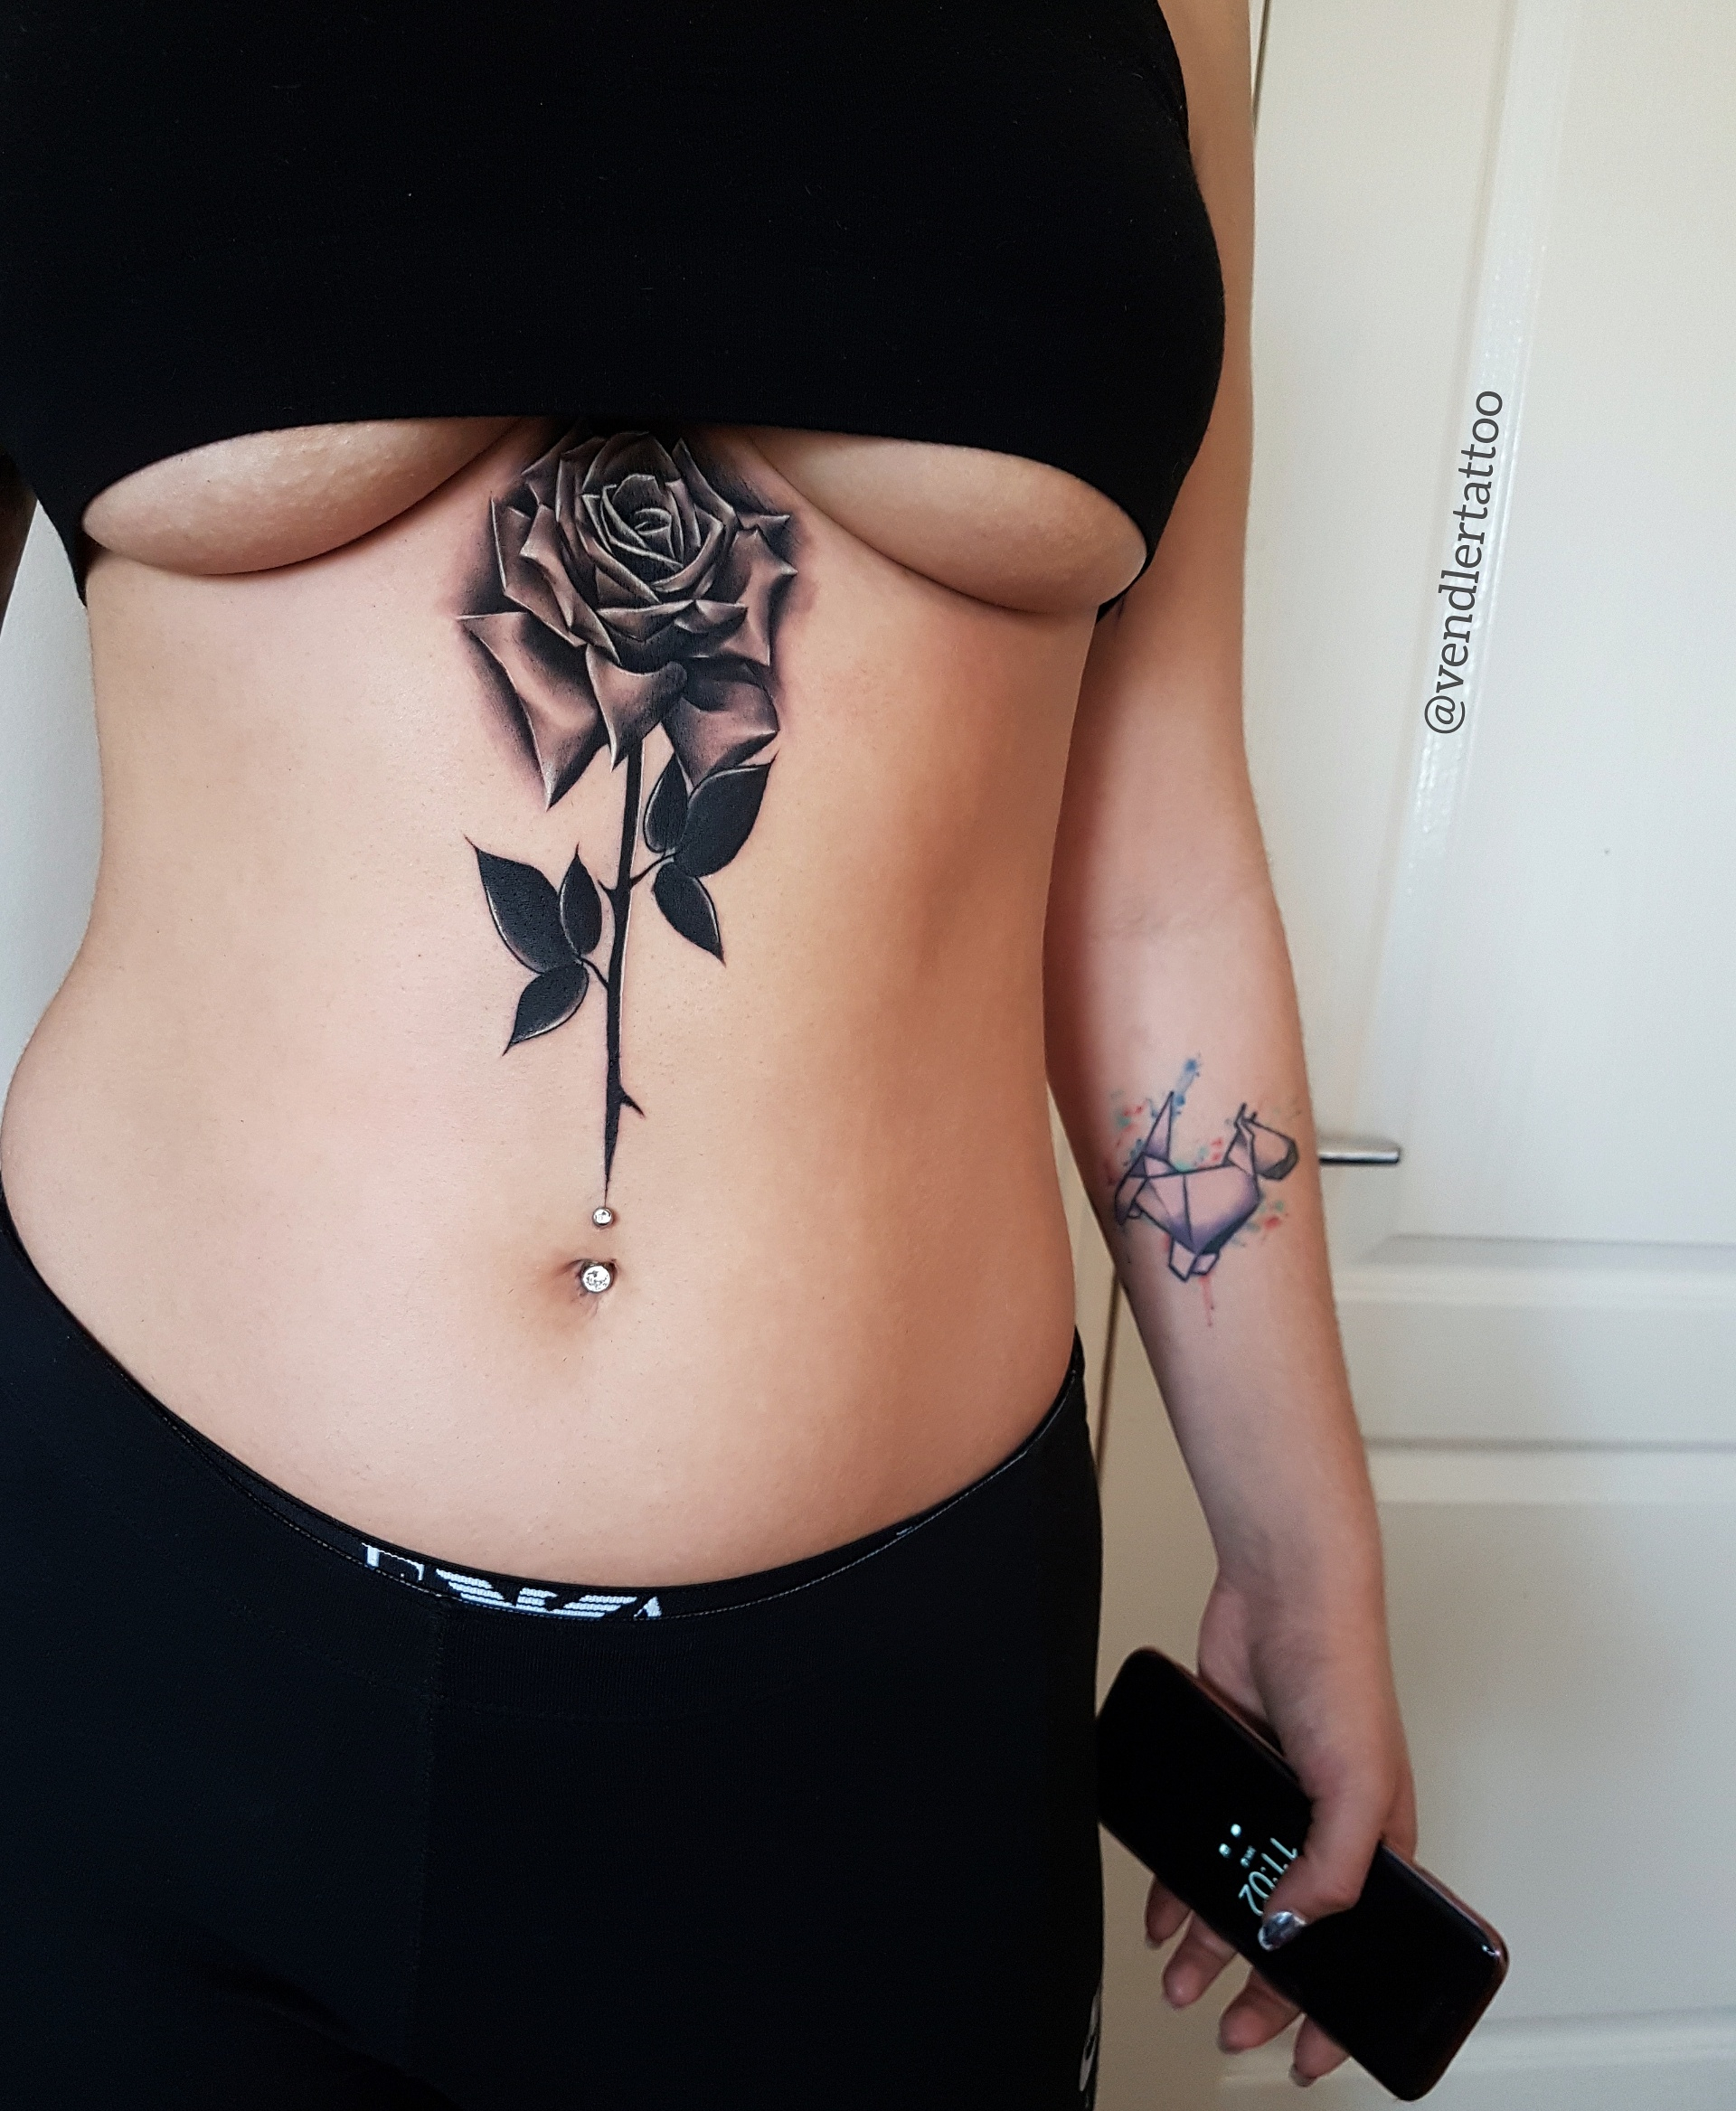 Amazing Chest Tattoos Approved Artists within dimensions 1920 X 2335